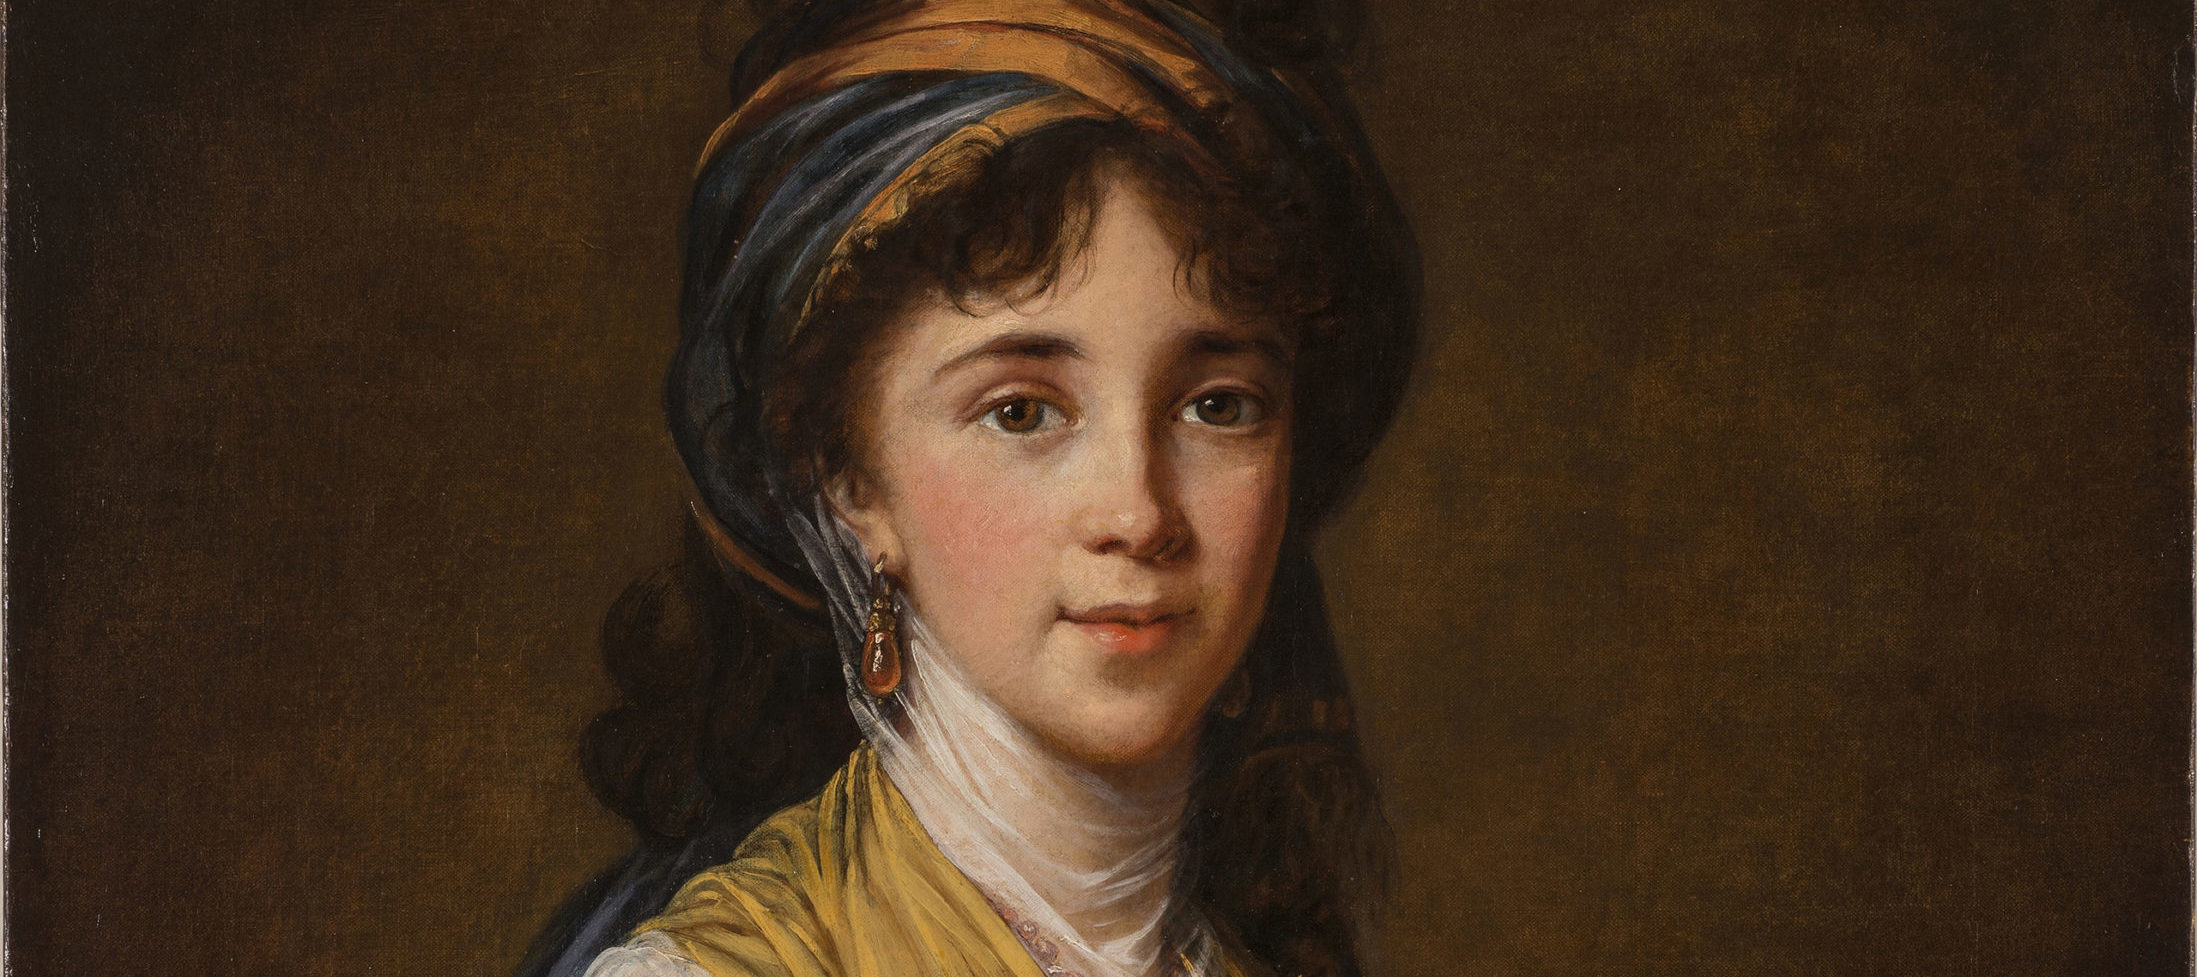 Realistically rendered half-portrait of a light-skinned young woman, gazing directly at the viewer with a faint smile on her lips. Her dark, curly hair is attractively tousled, secured under a turban-like headdress which matches her gold and blue draped ensemble.